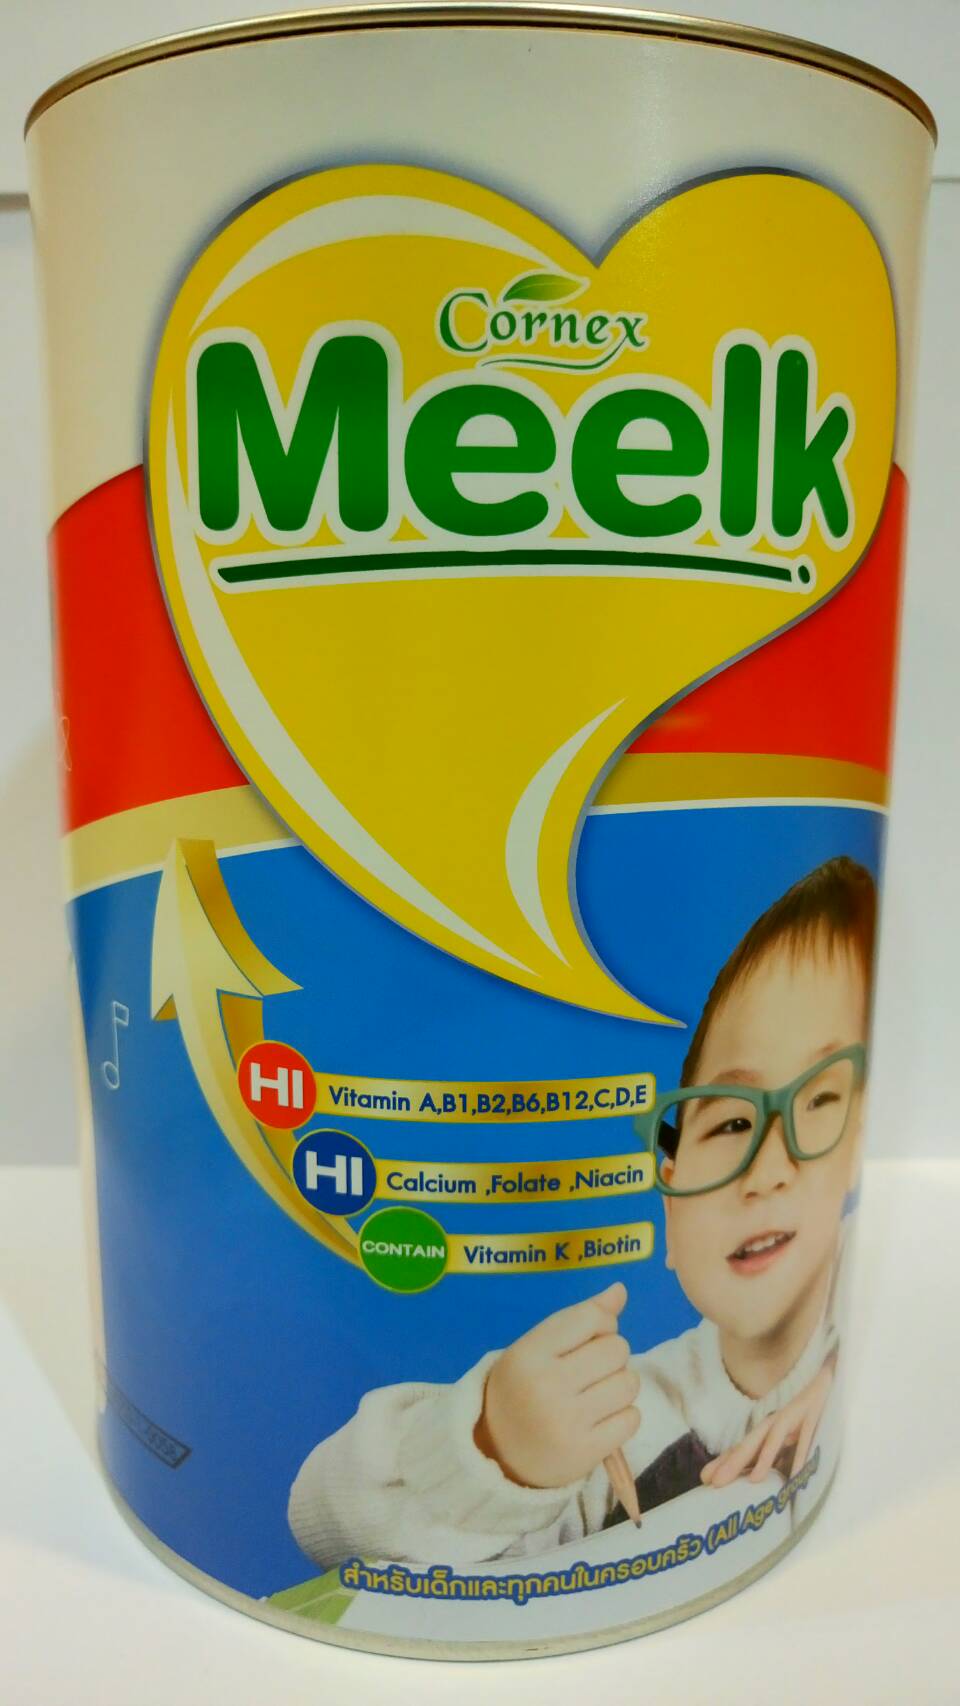 Milk Powder for Kids and Everyone in Family